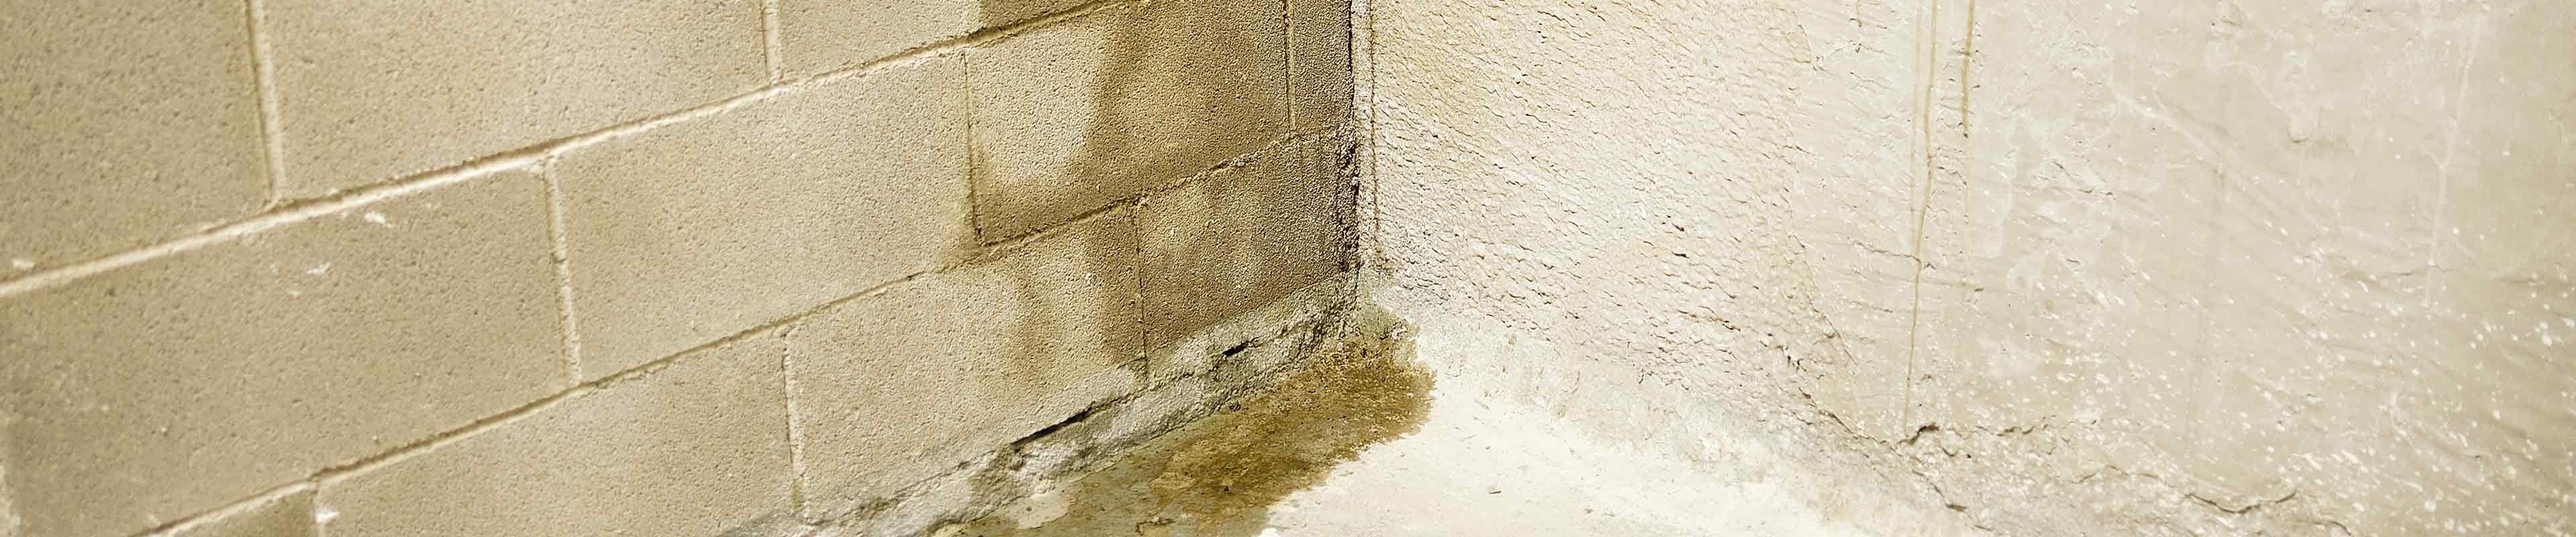 Image of a basement wall with ceder blocks leaking water.